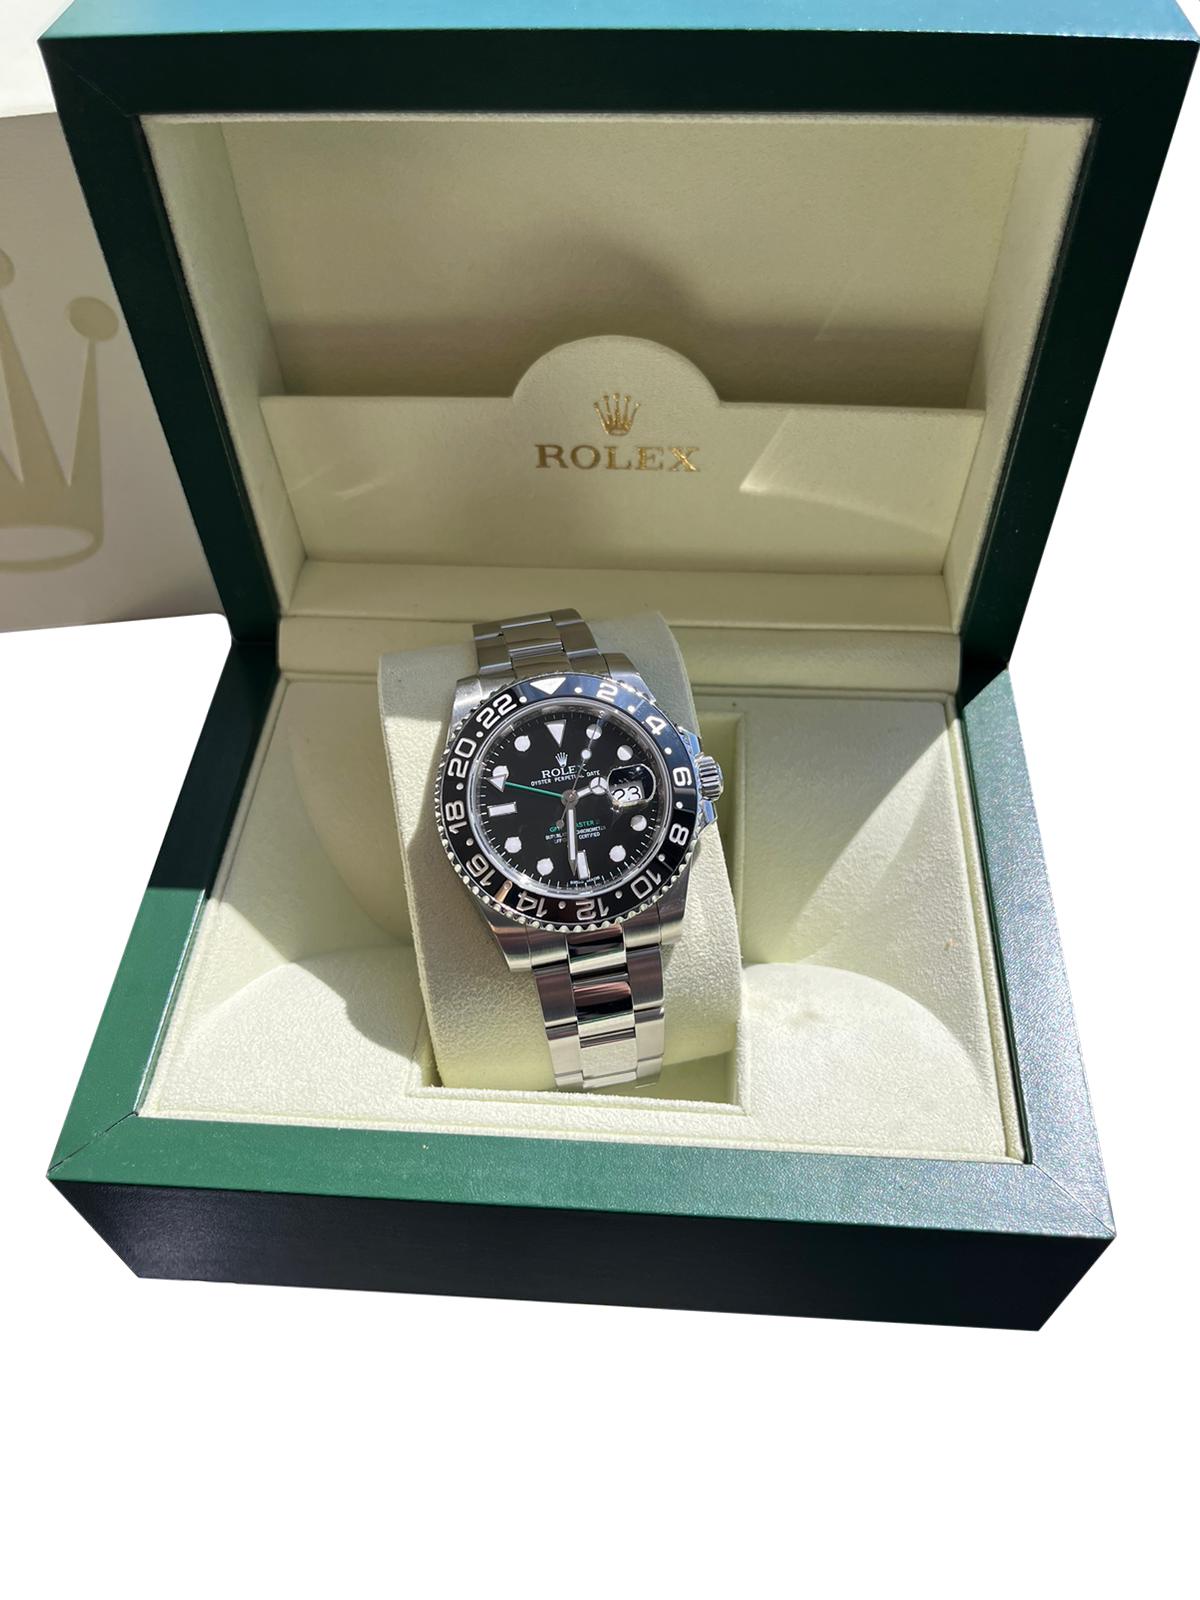 Modernist Rolex GMT-Master II 40mm GMT Date Black Dial Stainless Steel Date Watch 116710LN